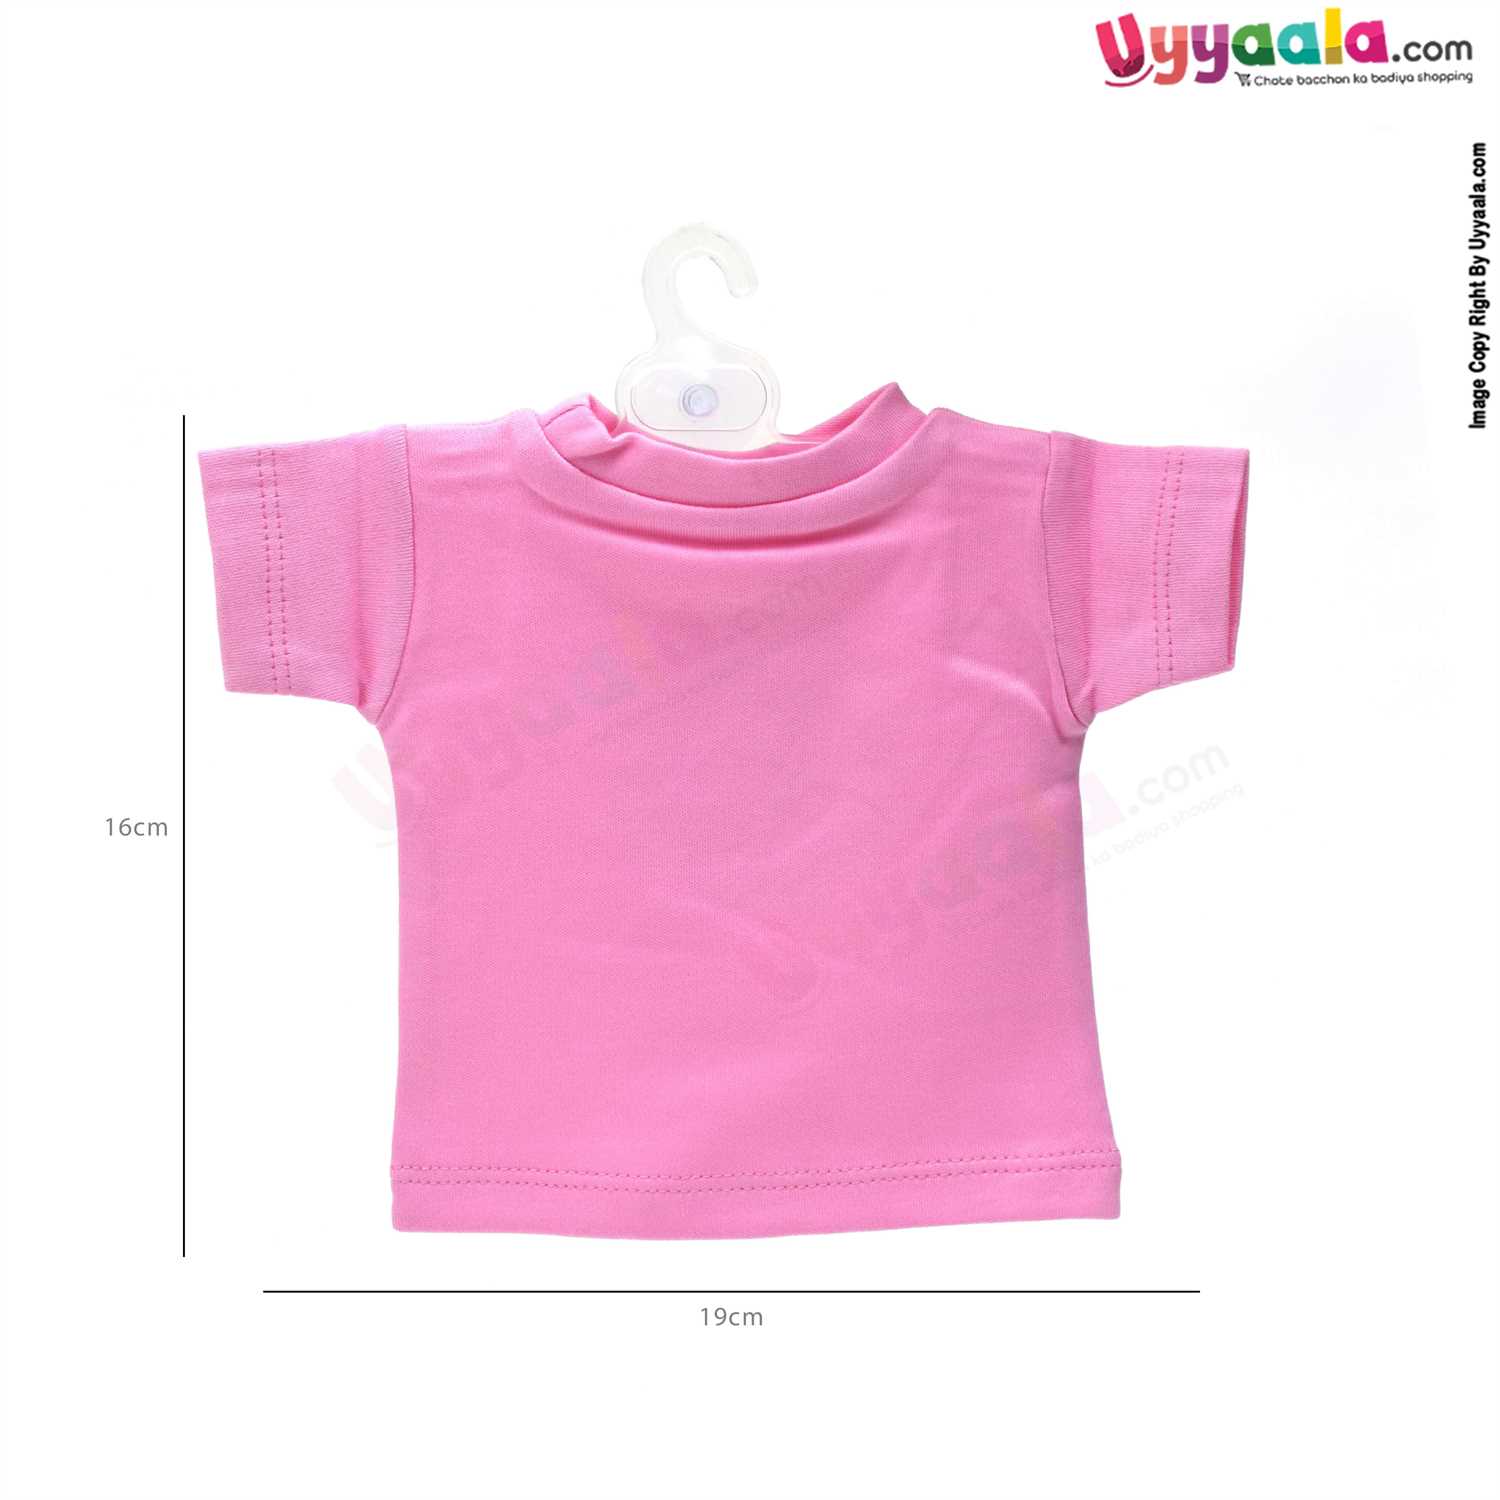 Baby on Board sign T-Shirt for Car , Size (19*16cm)- Pink